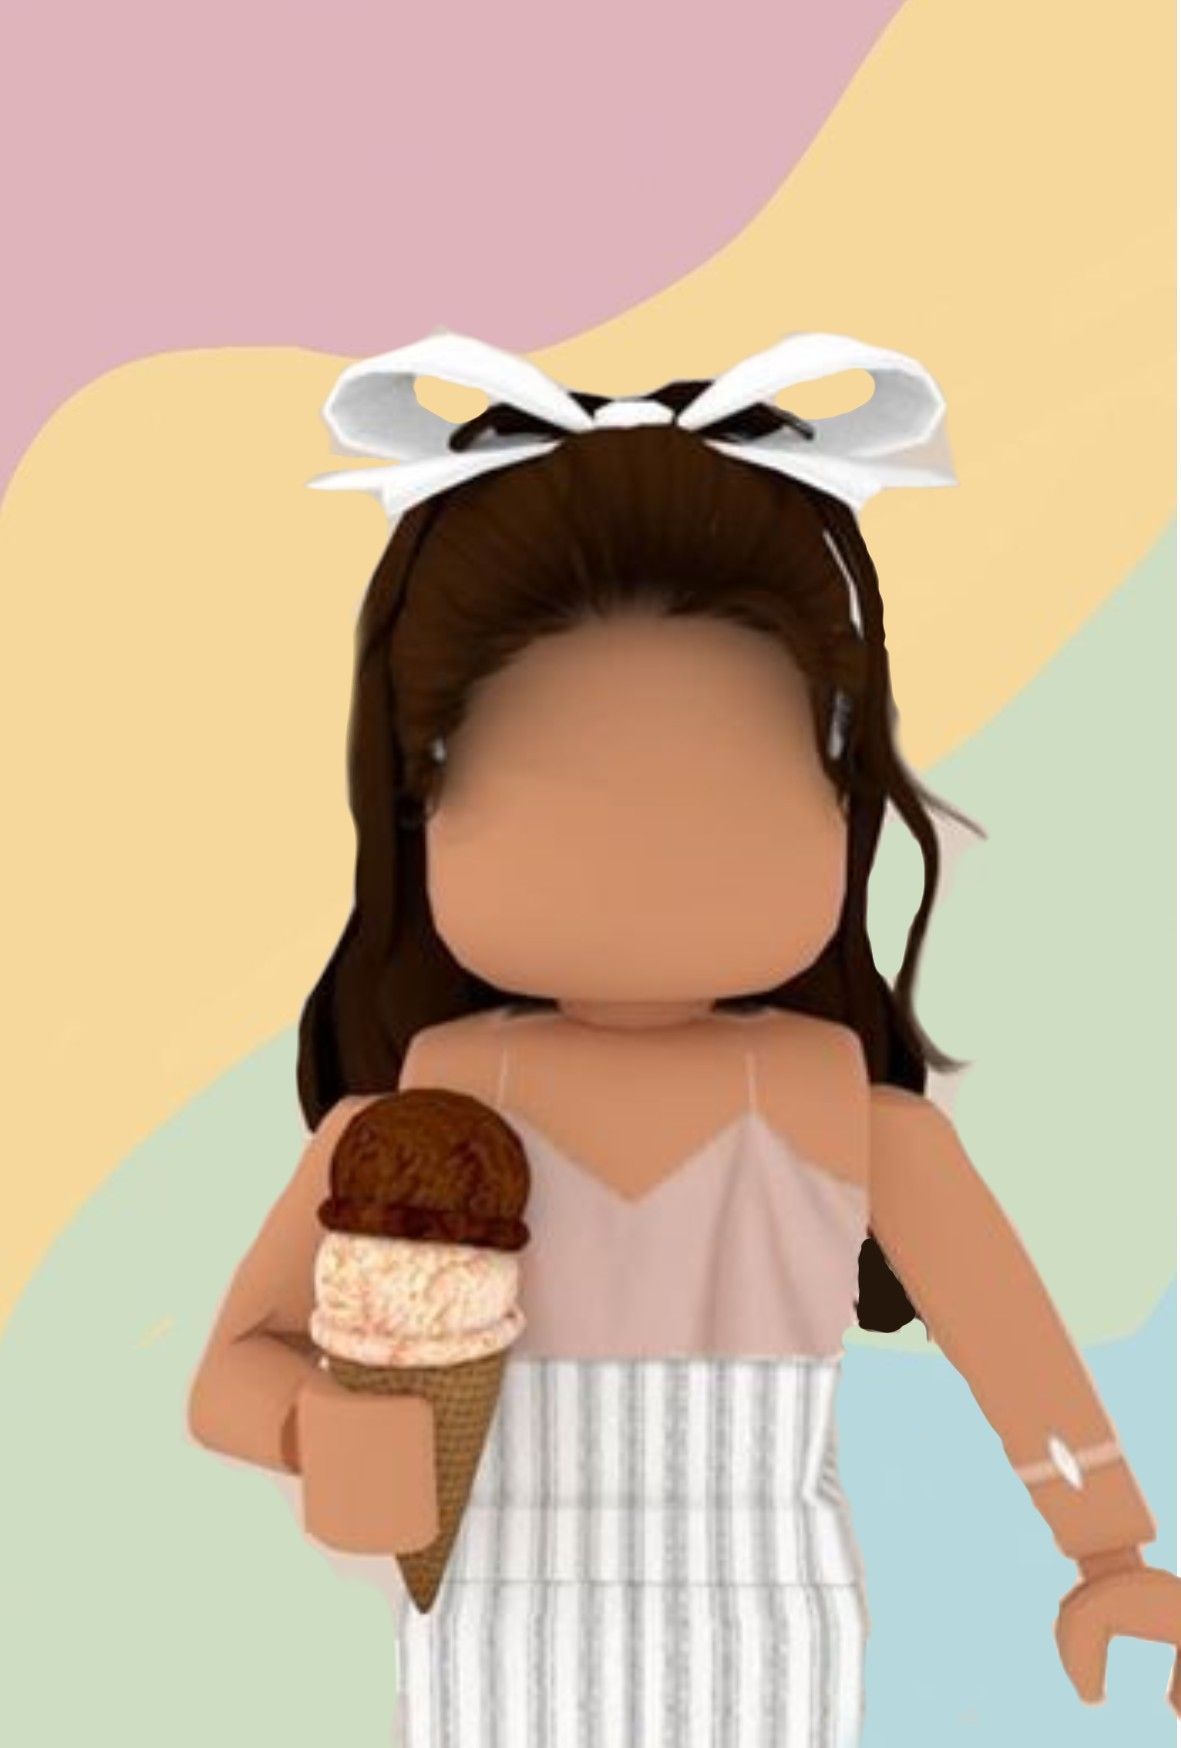 Download Cute Roblox GirlBrown Background Wallpaper